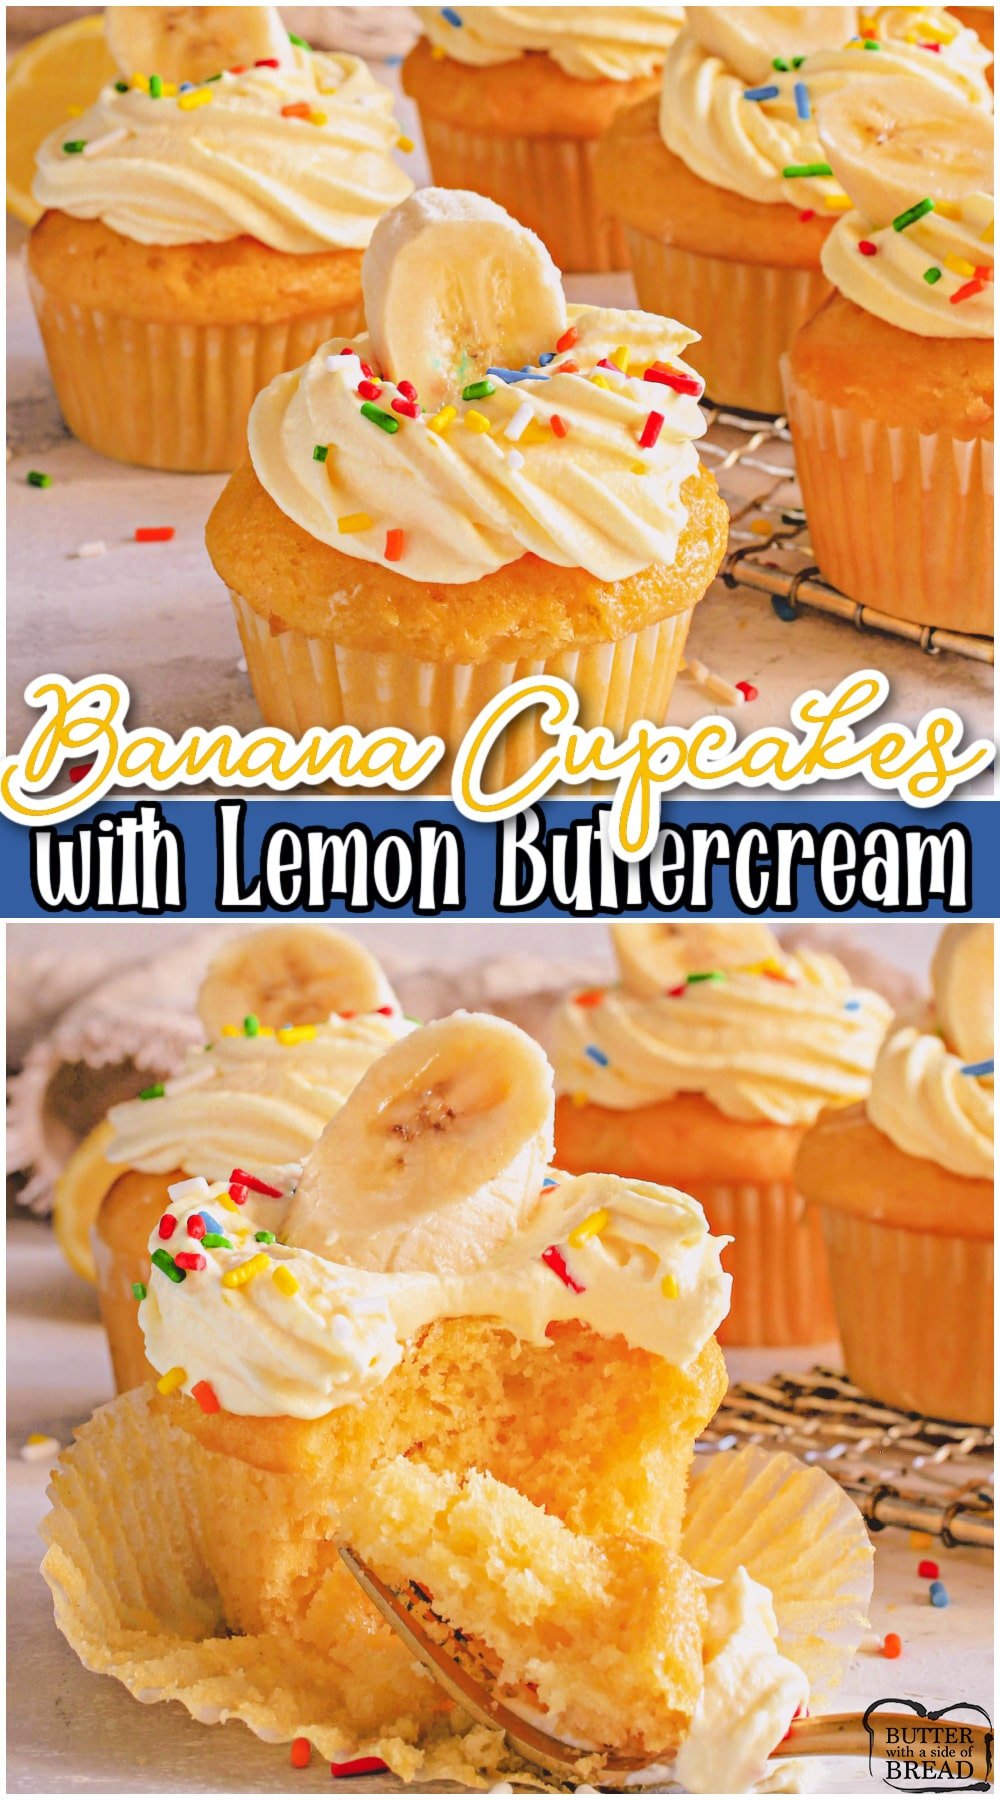 Banana cupcakes with lemon marshmallow buttercream frosting made from scratch with simple ingredients! Soft, sweet homemade banana cupcakes topped with a luscious lemon frosting recipe you'll love! 